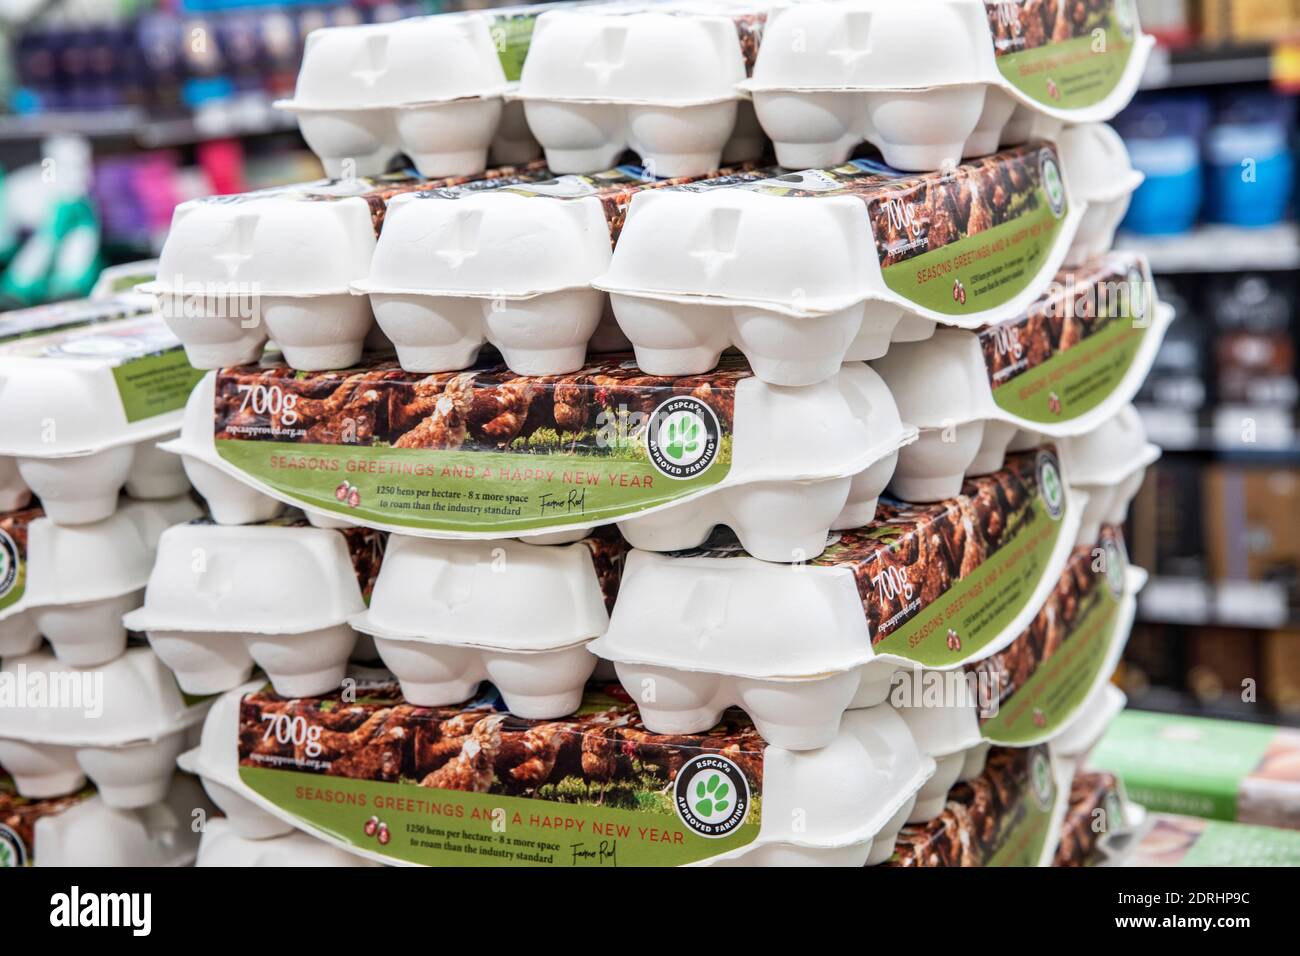 Cartons of fresh eggs with merry Christmas message on sale in a Sydney supermarket Stock Photo